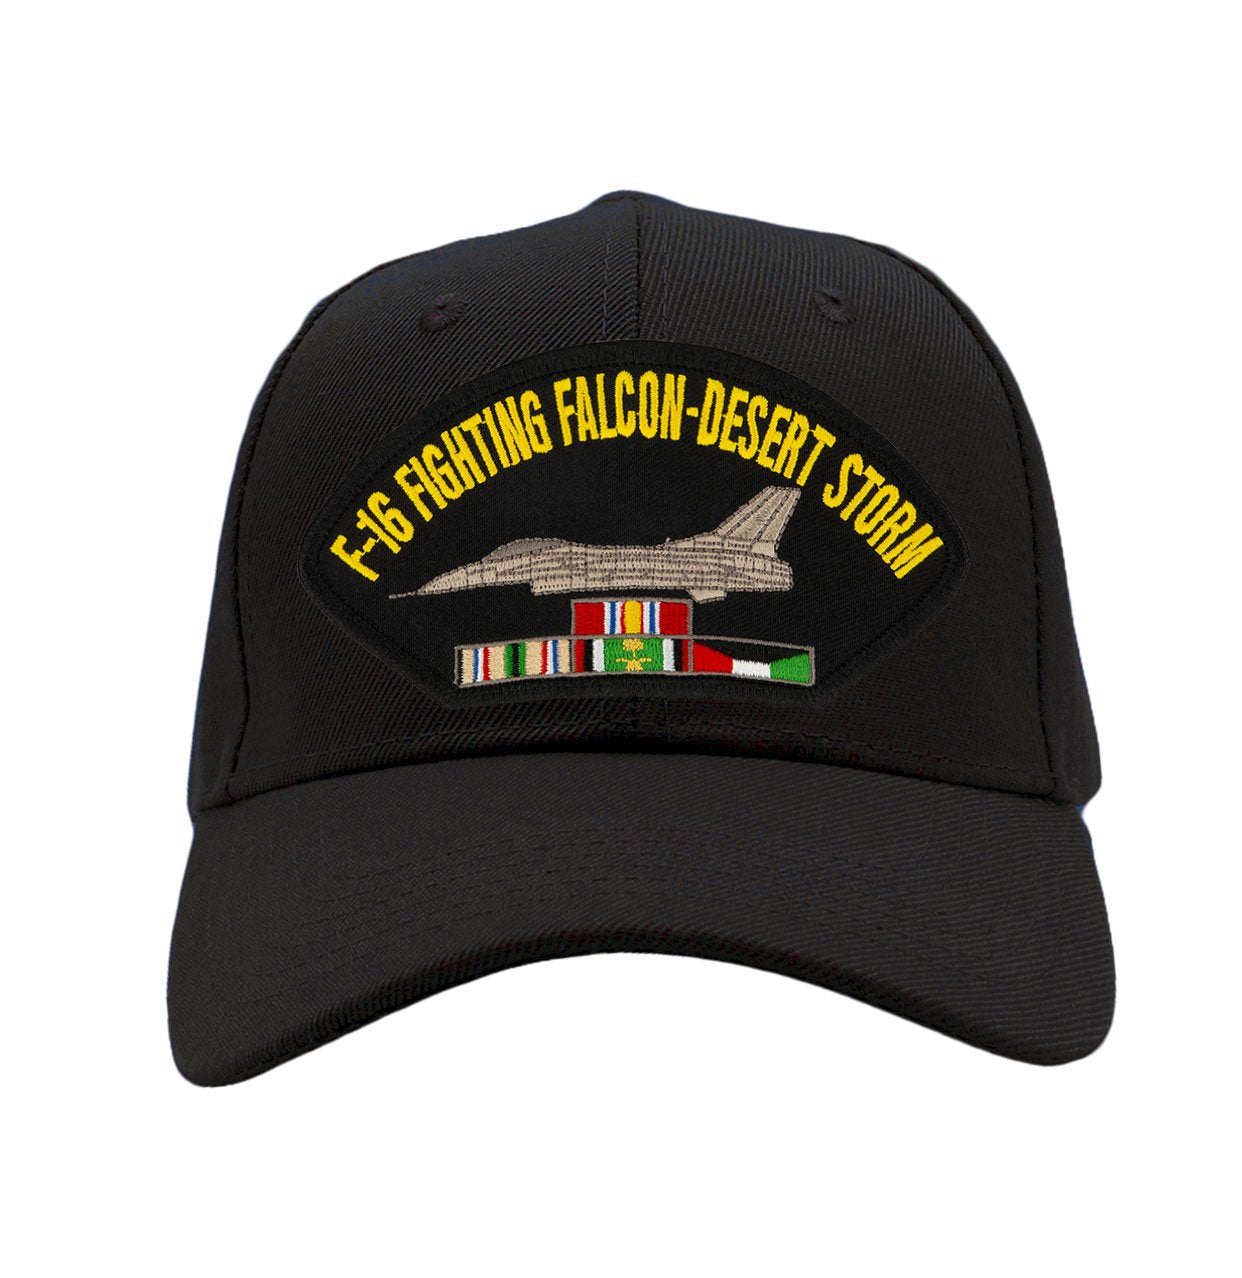 F-16 Fighting Falcon - Desert Storm Veteran Hat - Multiple Colors Available